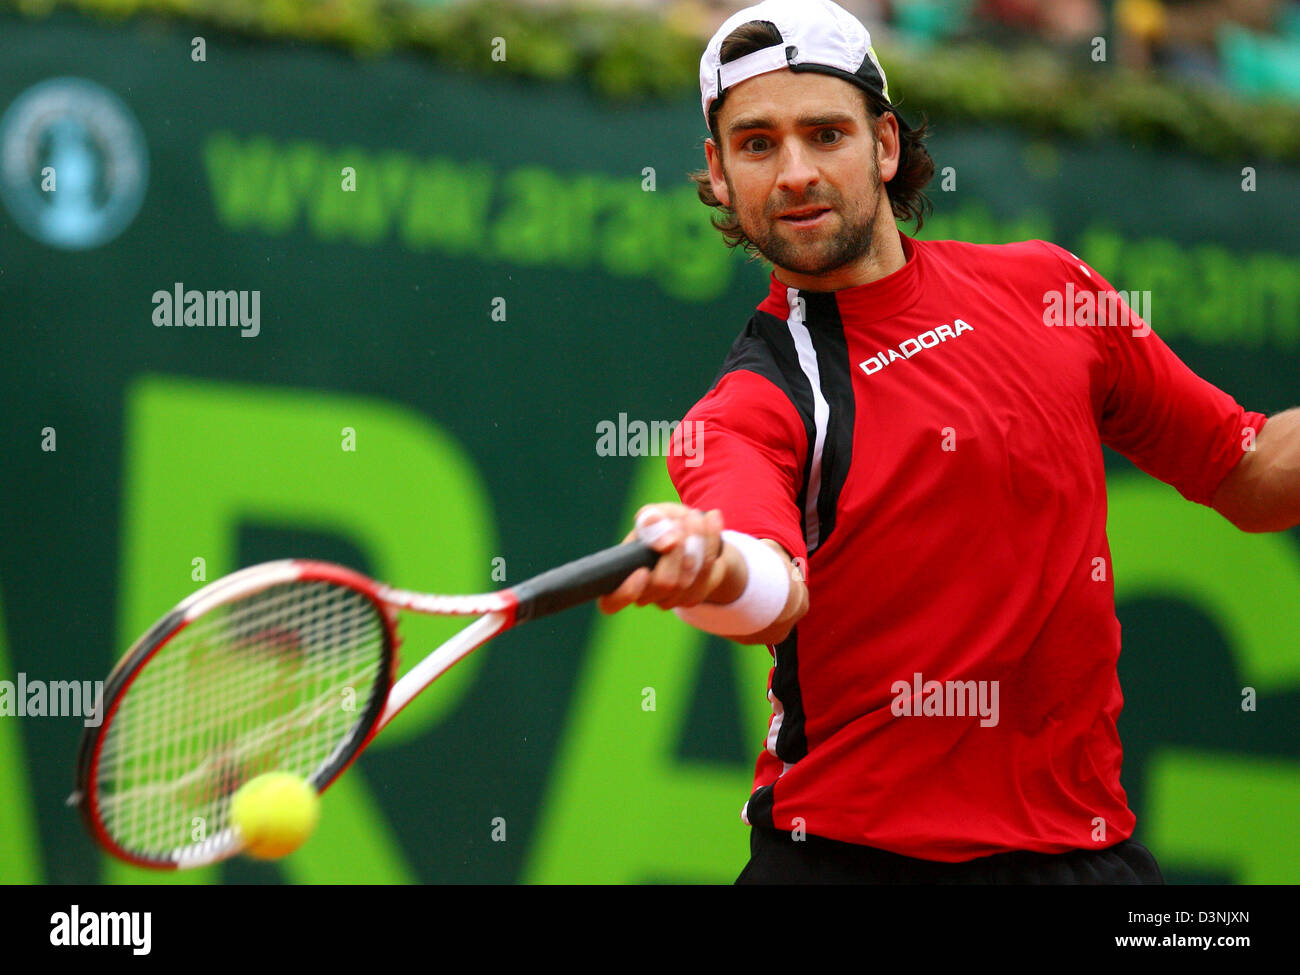 German tennis pro returns a ball during his match against Czech Berdych at the World Team Cup in Duesseldorf, Germany, Thursday, 25 May 2006.Photo: Felix Heyder Stock Photo